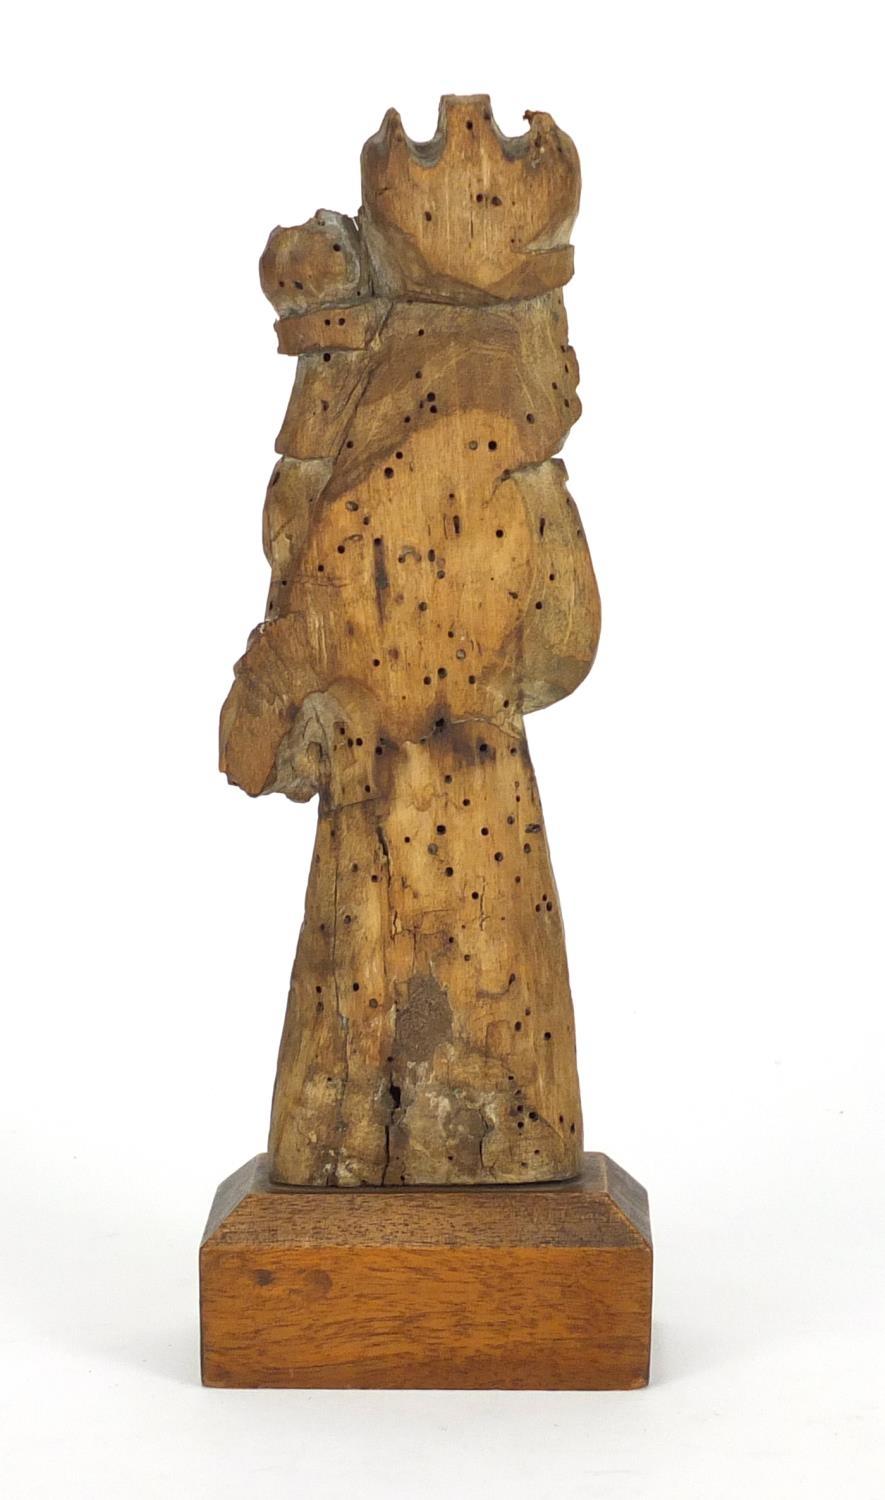 14th/15th century limewood carving of Madonna and child, raised on a rectangular mahogany block - Image 3 of 5